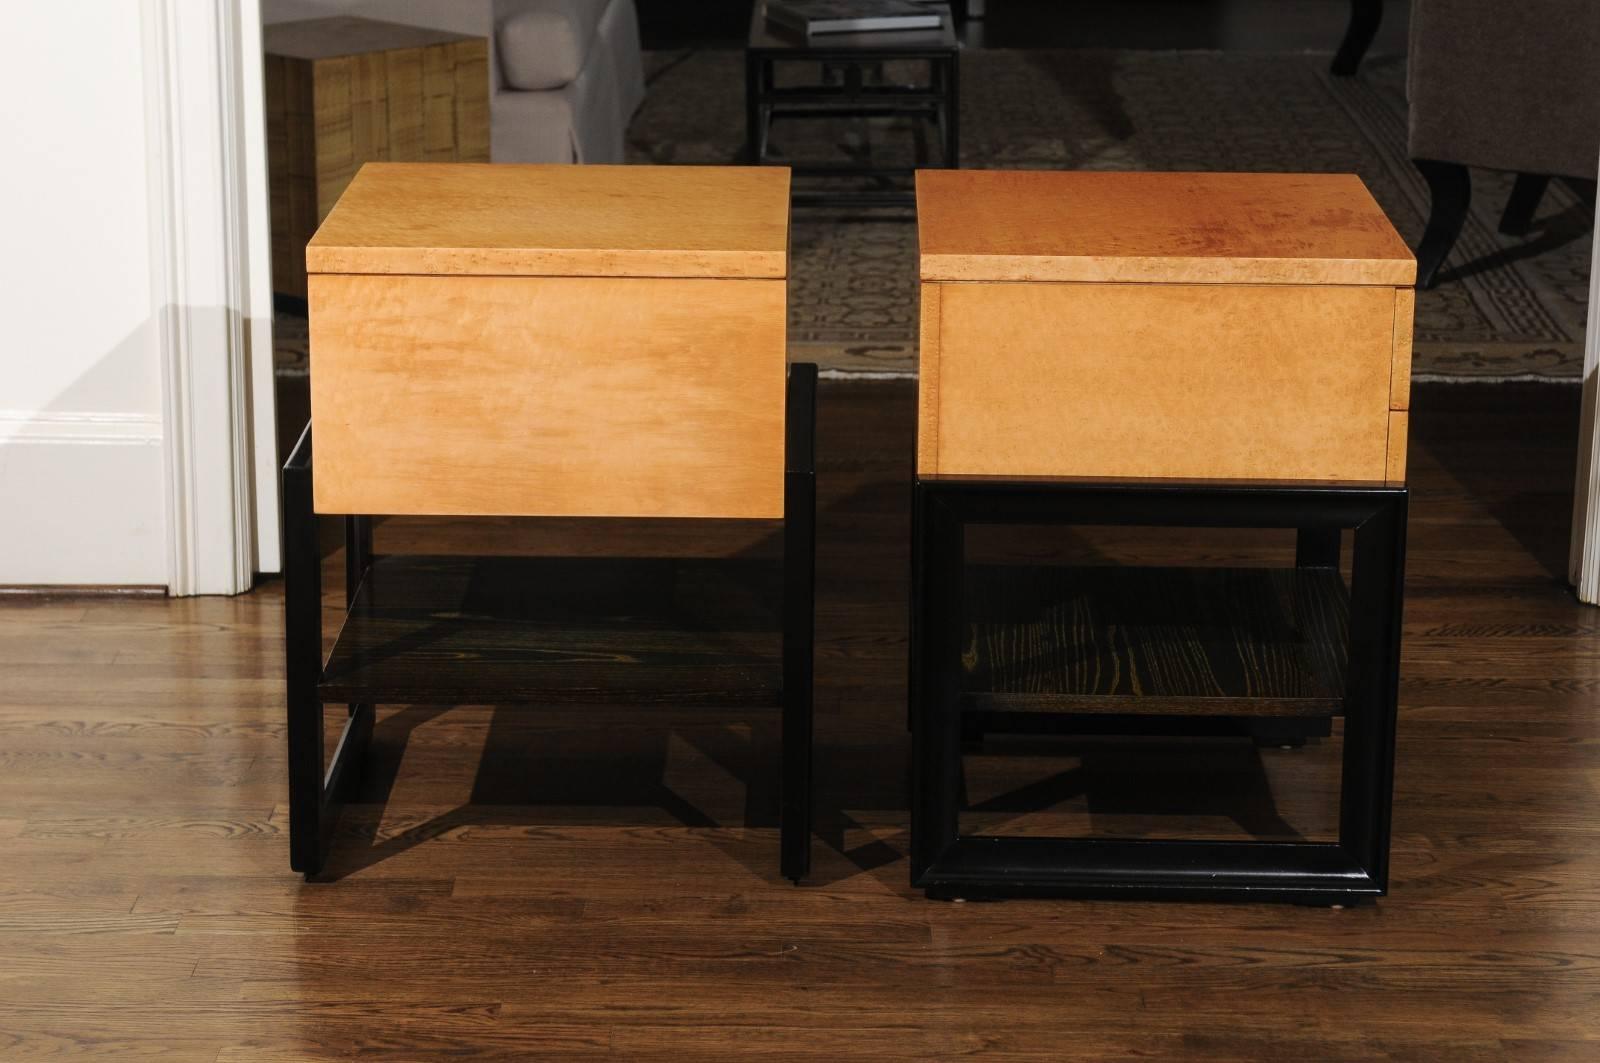 Magnificent Pair of End Tables by Renzo Rutili in Birdseye Maple, circa 1955 For Sale 3